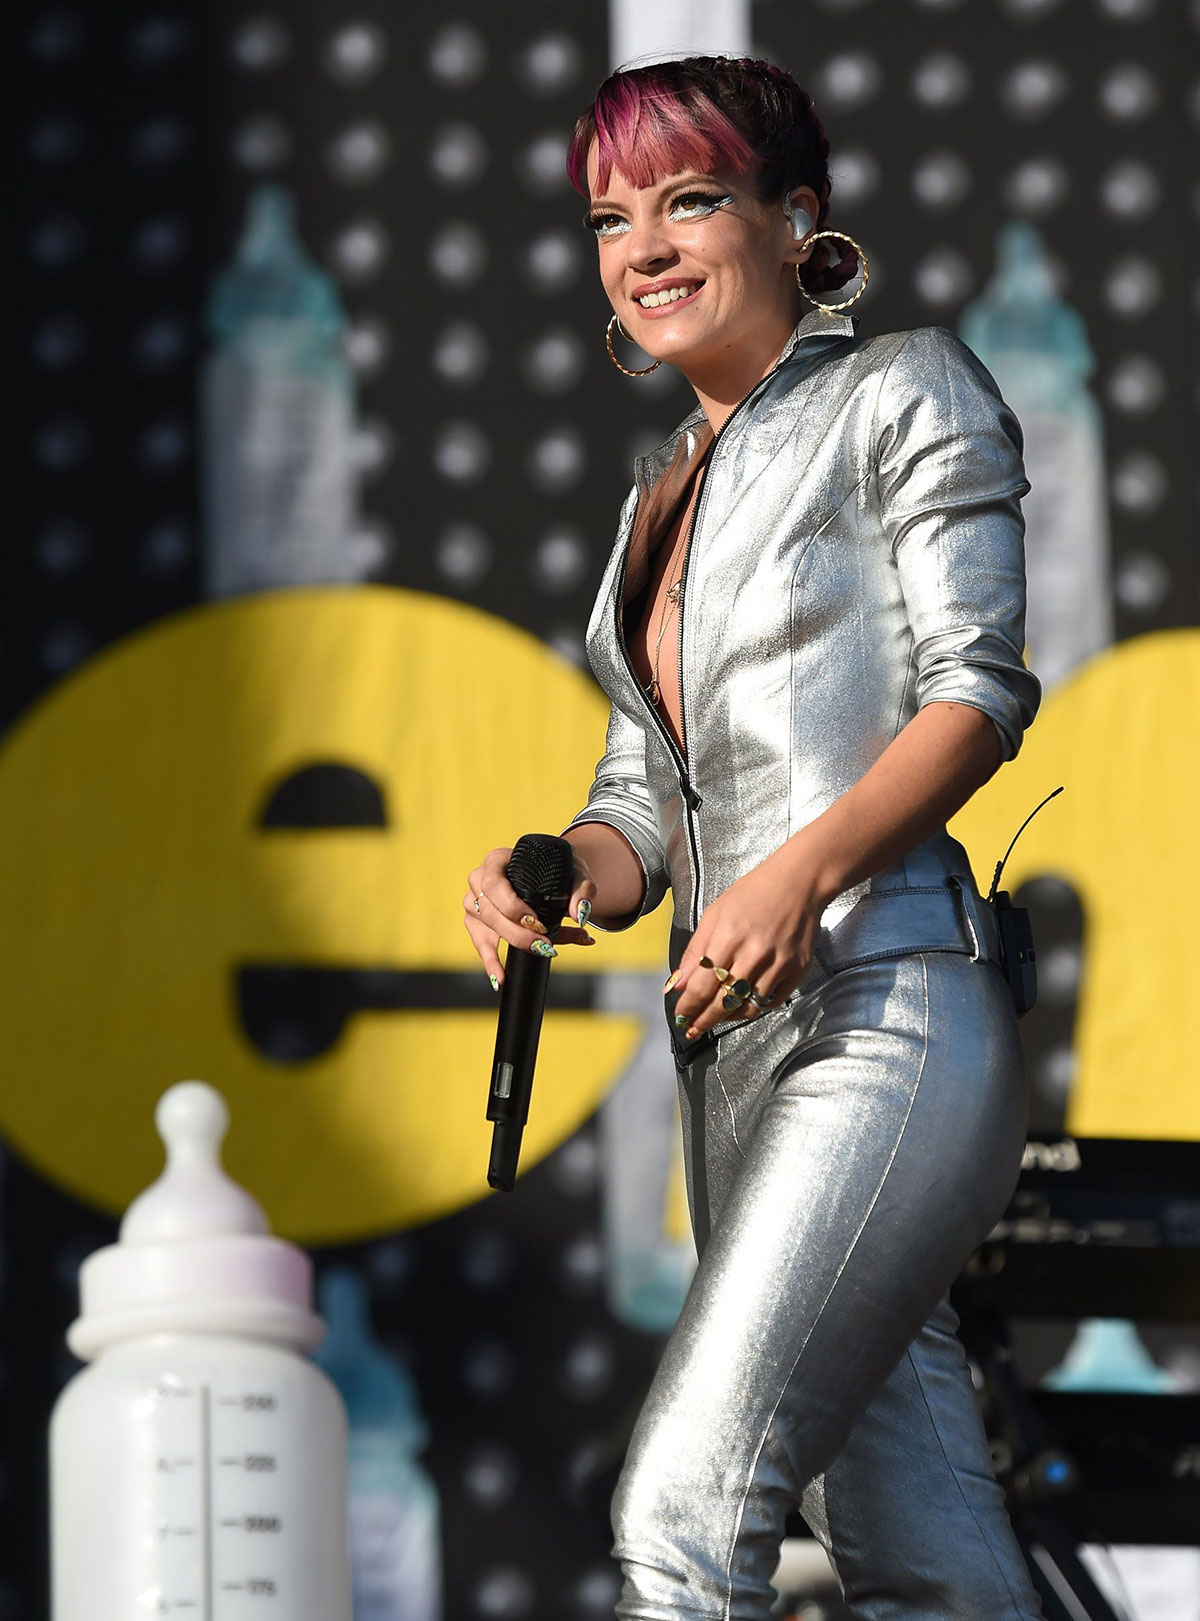 Lily Allen performance candids at the V Festival